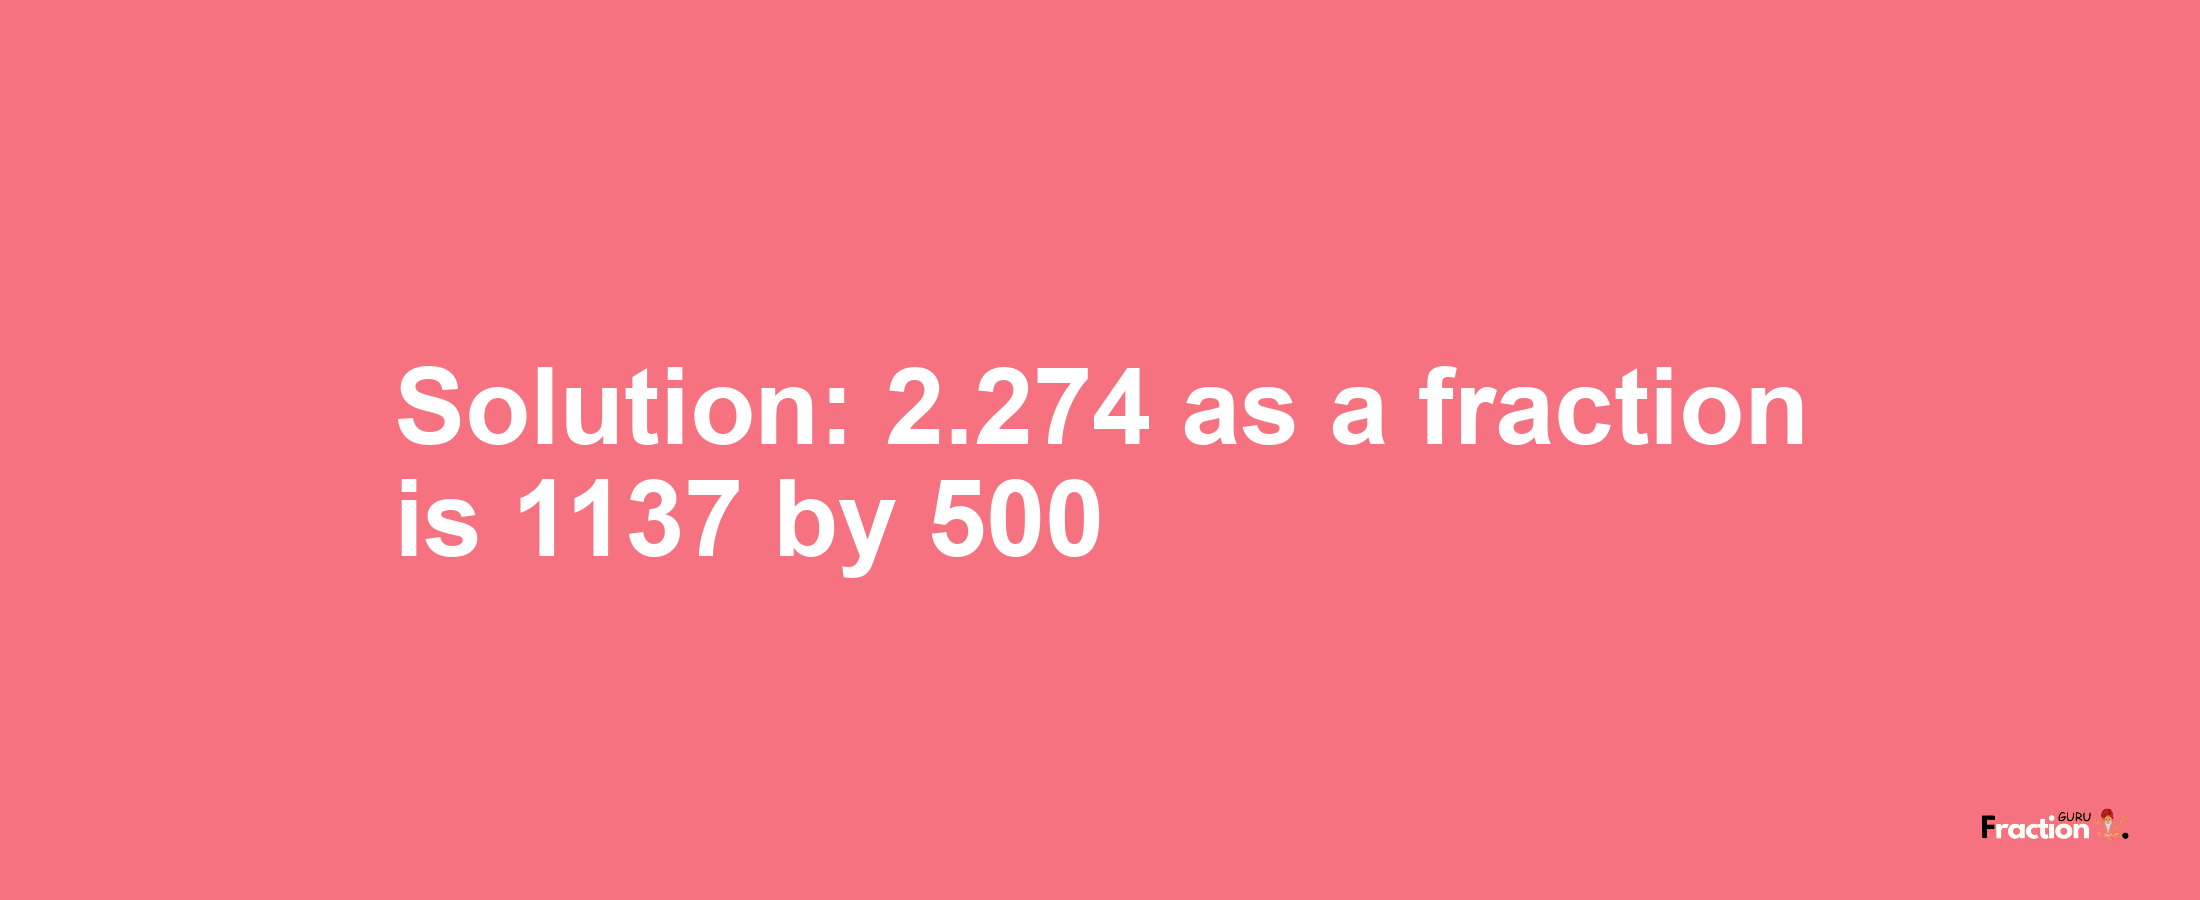 Solution:2.274 as a fraction is 1137/500